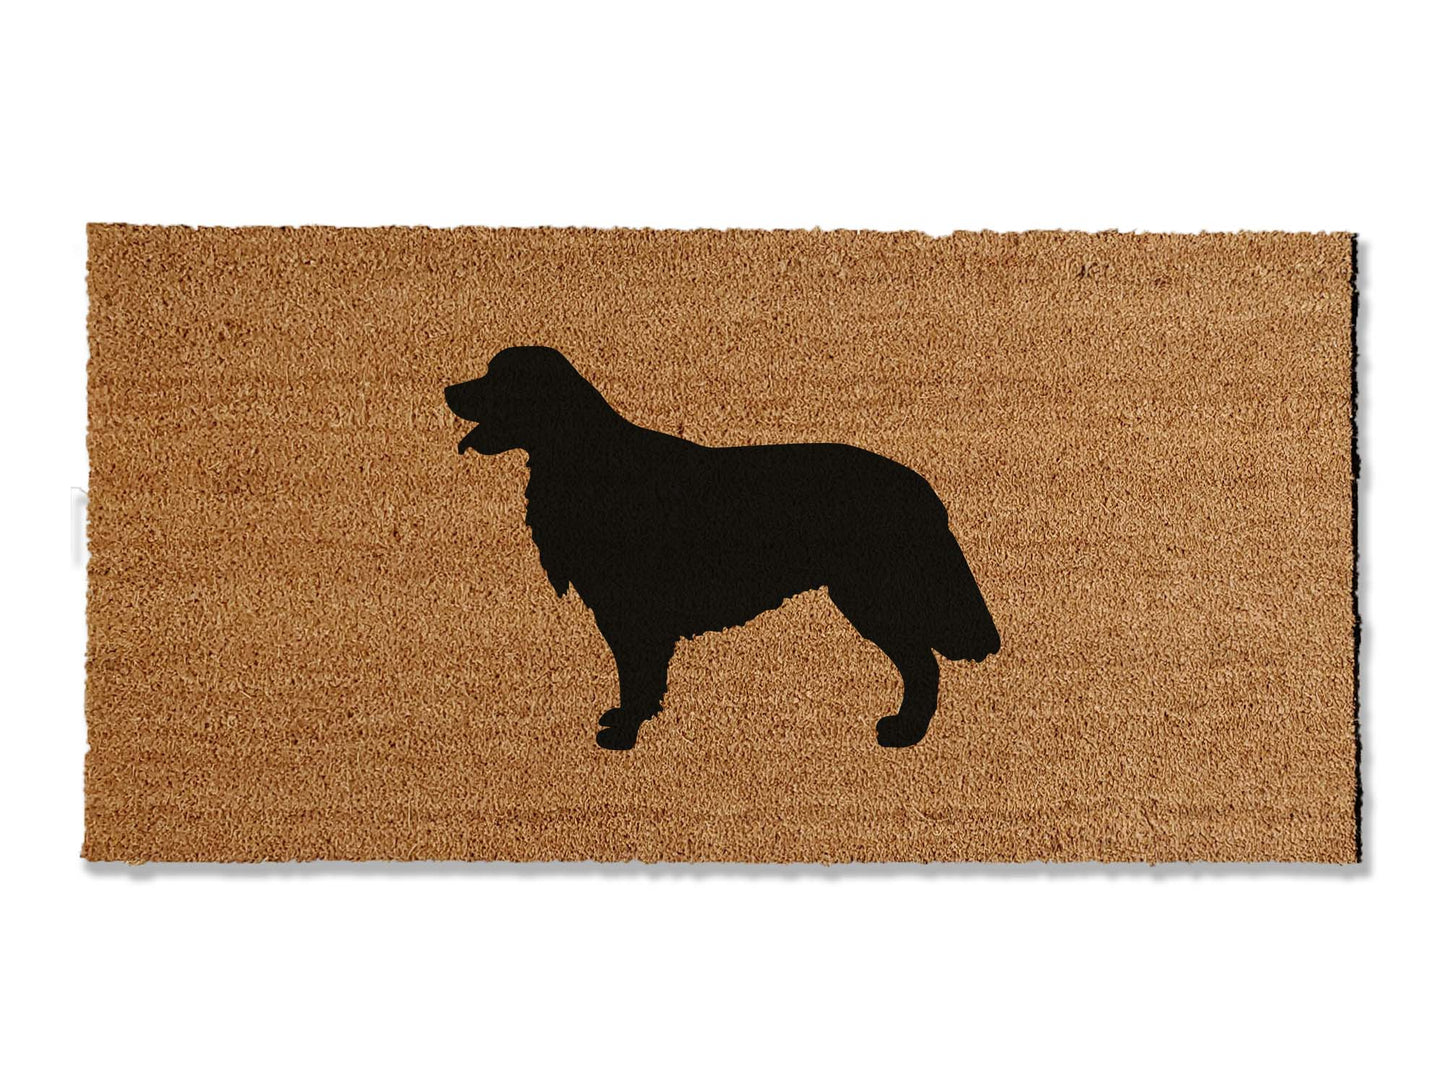 Welcome guests with our coir welcome doormat, featuring a charming Golden Retriever design. Available in multiple sizes, this is the perfect gift for Golden Retriever lovers, adding a touch of canine charm that effortlessly spruces up your entryway.